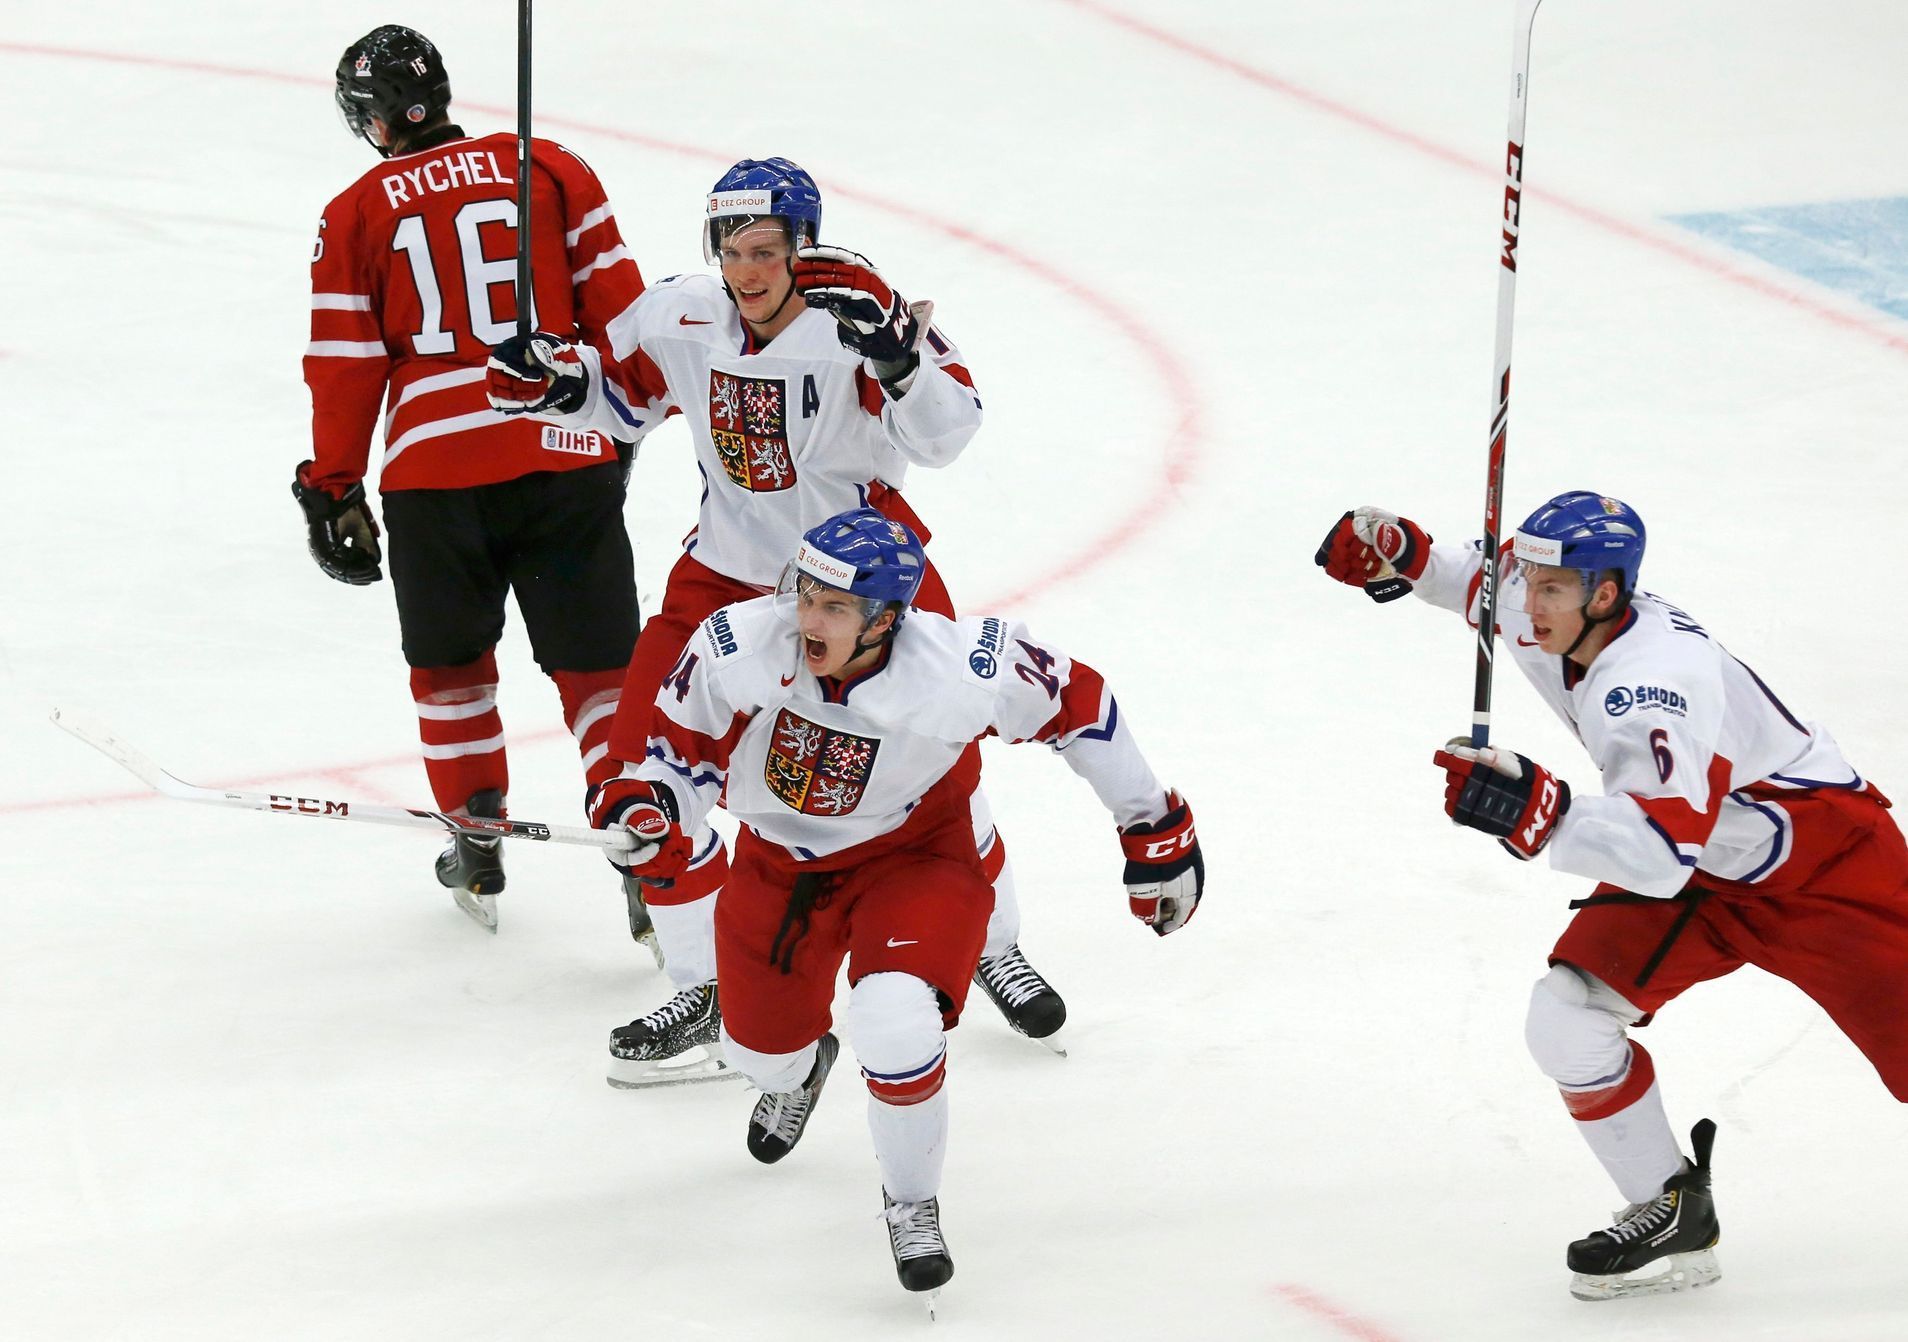 Czech Republic's Vrana, Knot and Faksa celebrate a goal against Canada during the second period of their IIHF World Junior Championship ice hockey game in Malmo